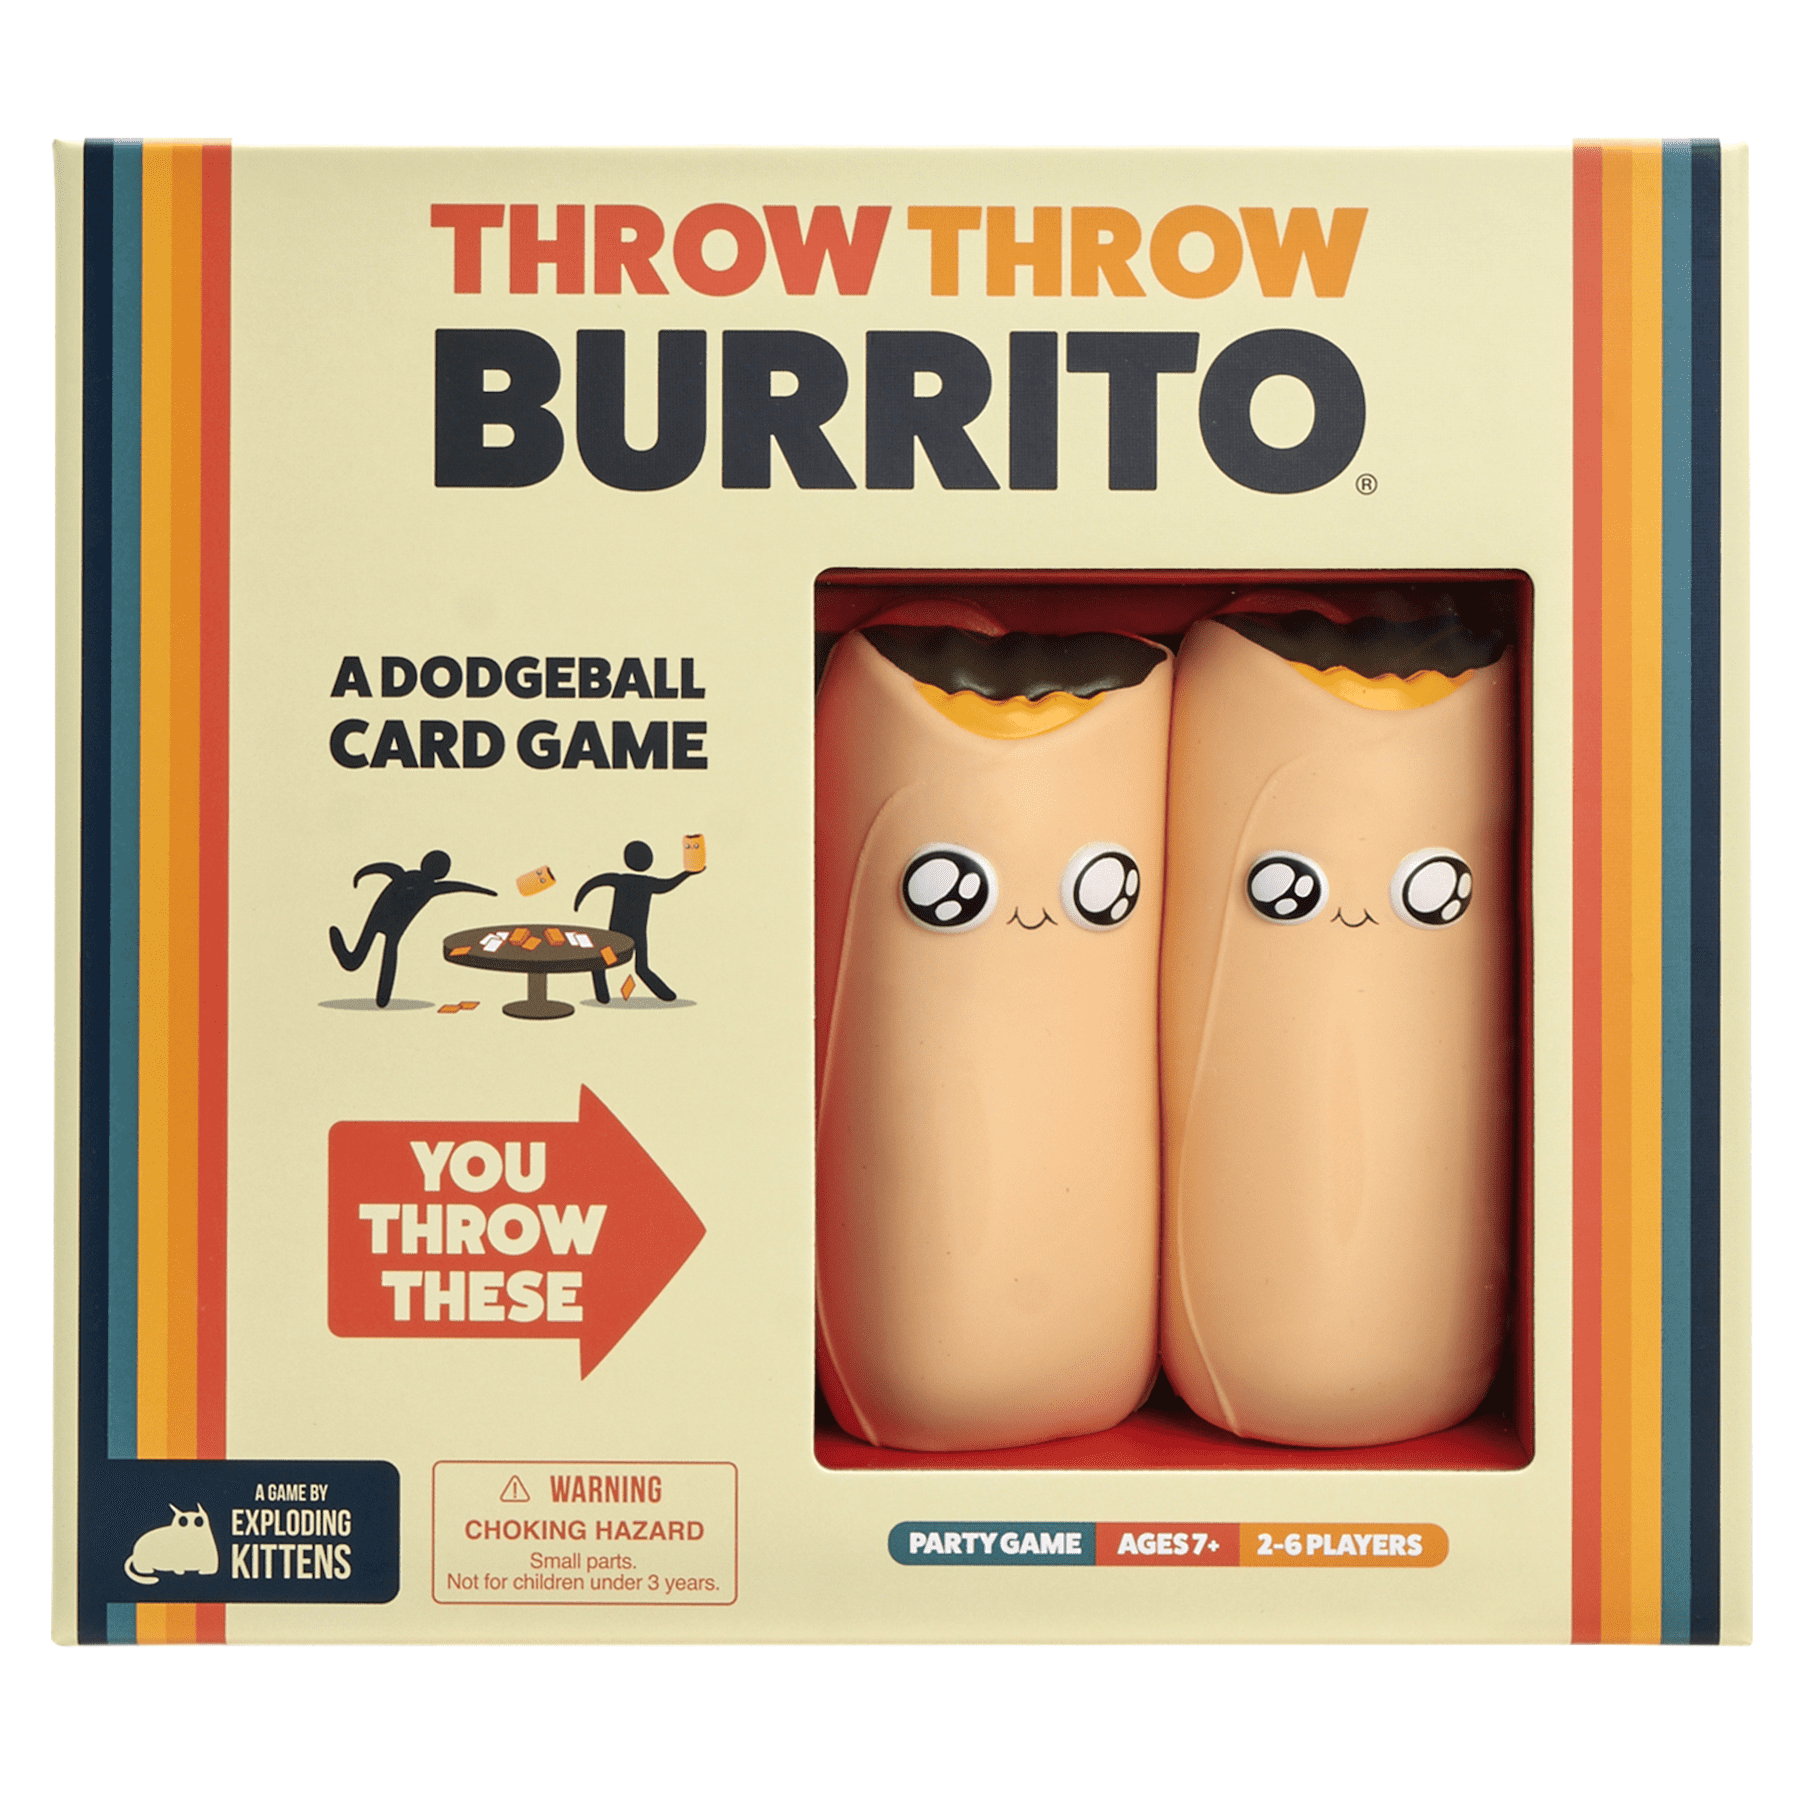 Throw Throw Burrito by Exploding Kittens A Dodgeball Party Game, Ages 7 And Up, 2-6 Players